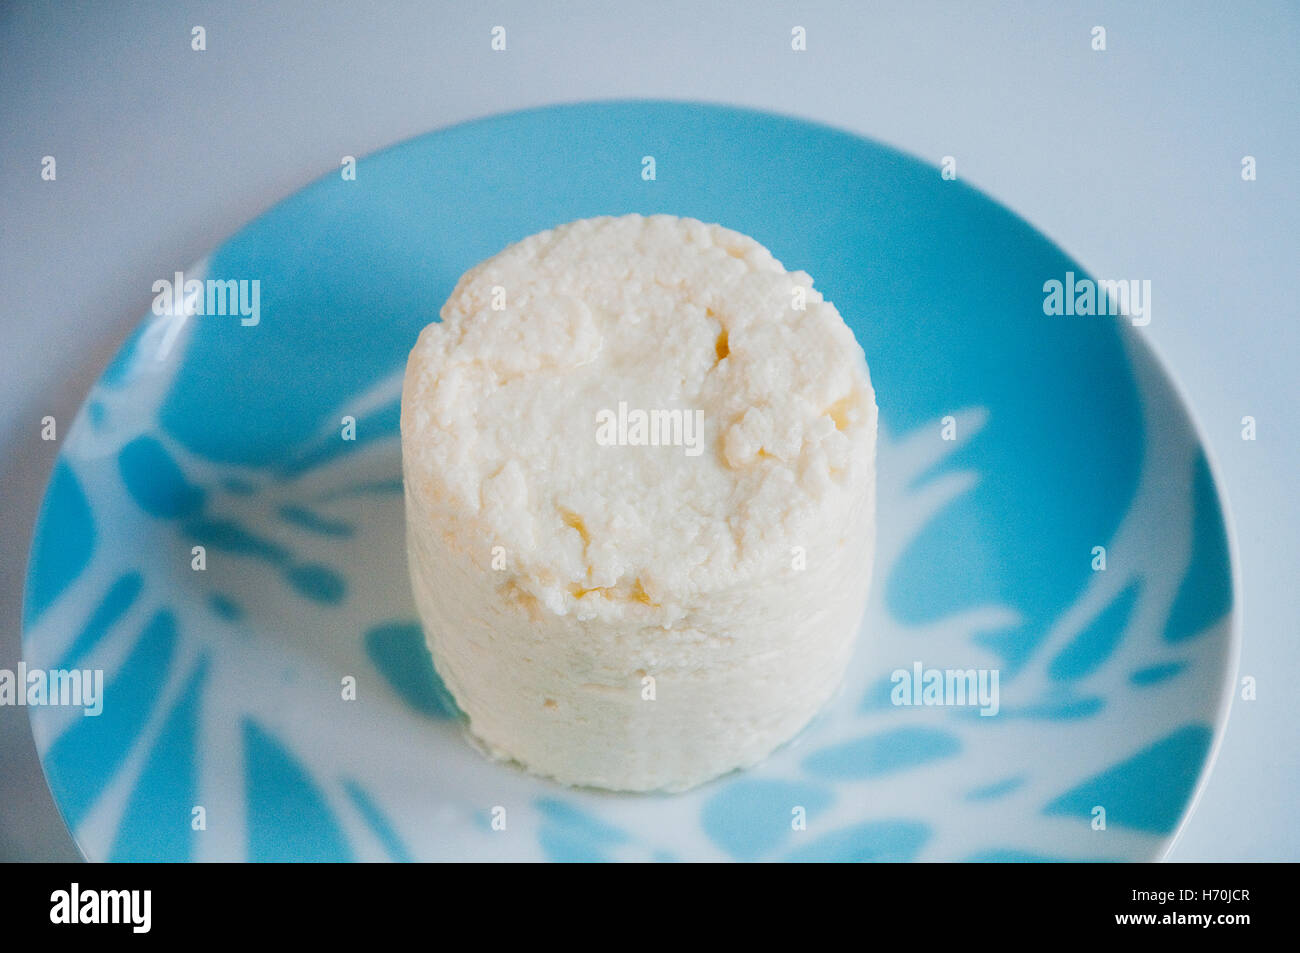 Cottage cheese. Stock Photo